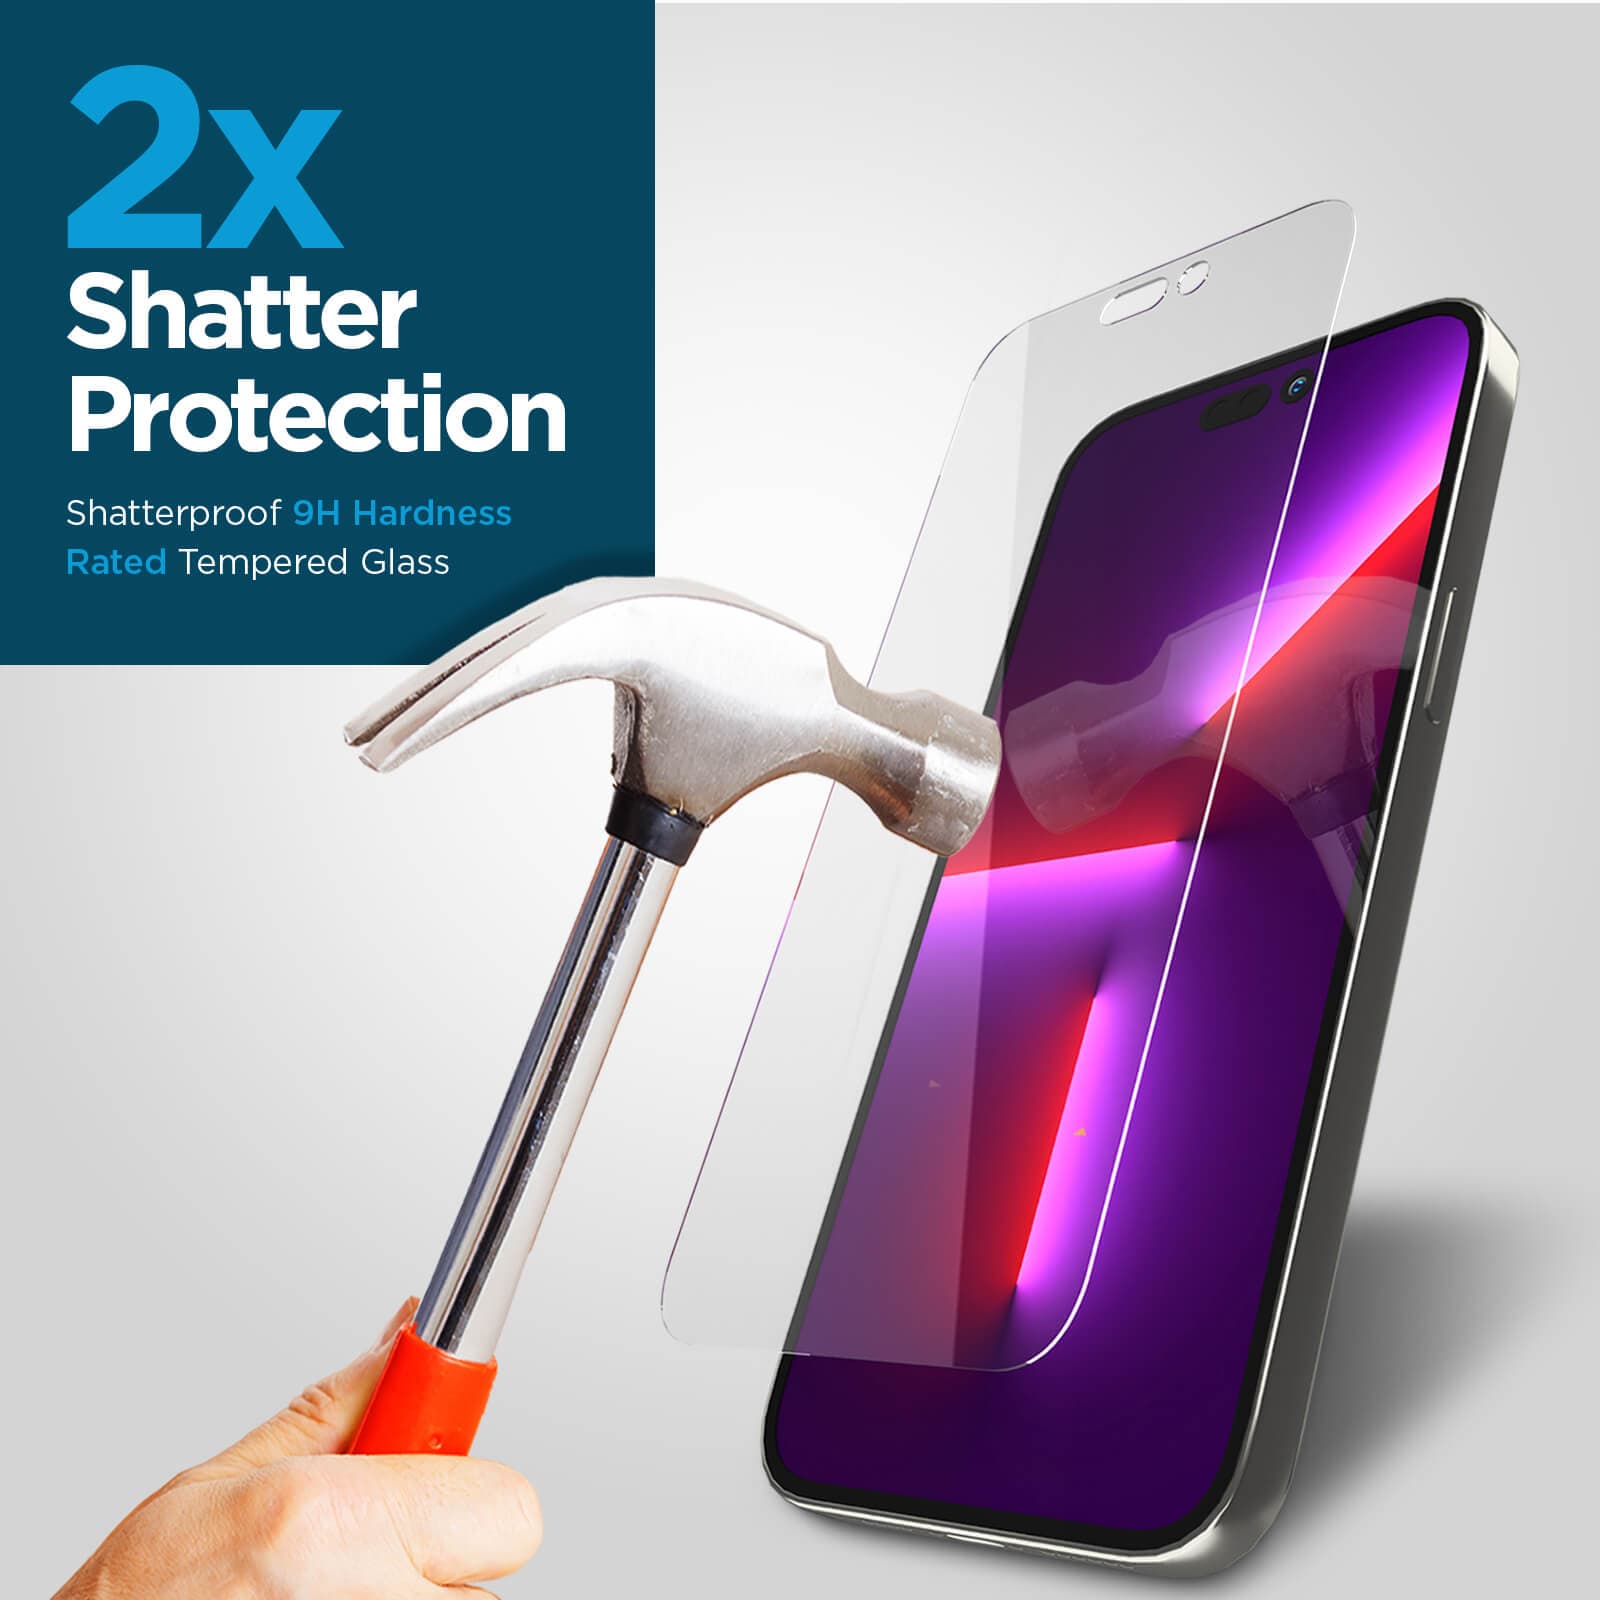 2x Shatter protection. Shatterproof 9H hardness tempered glass. color::Clear